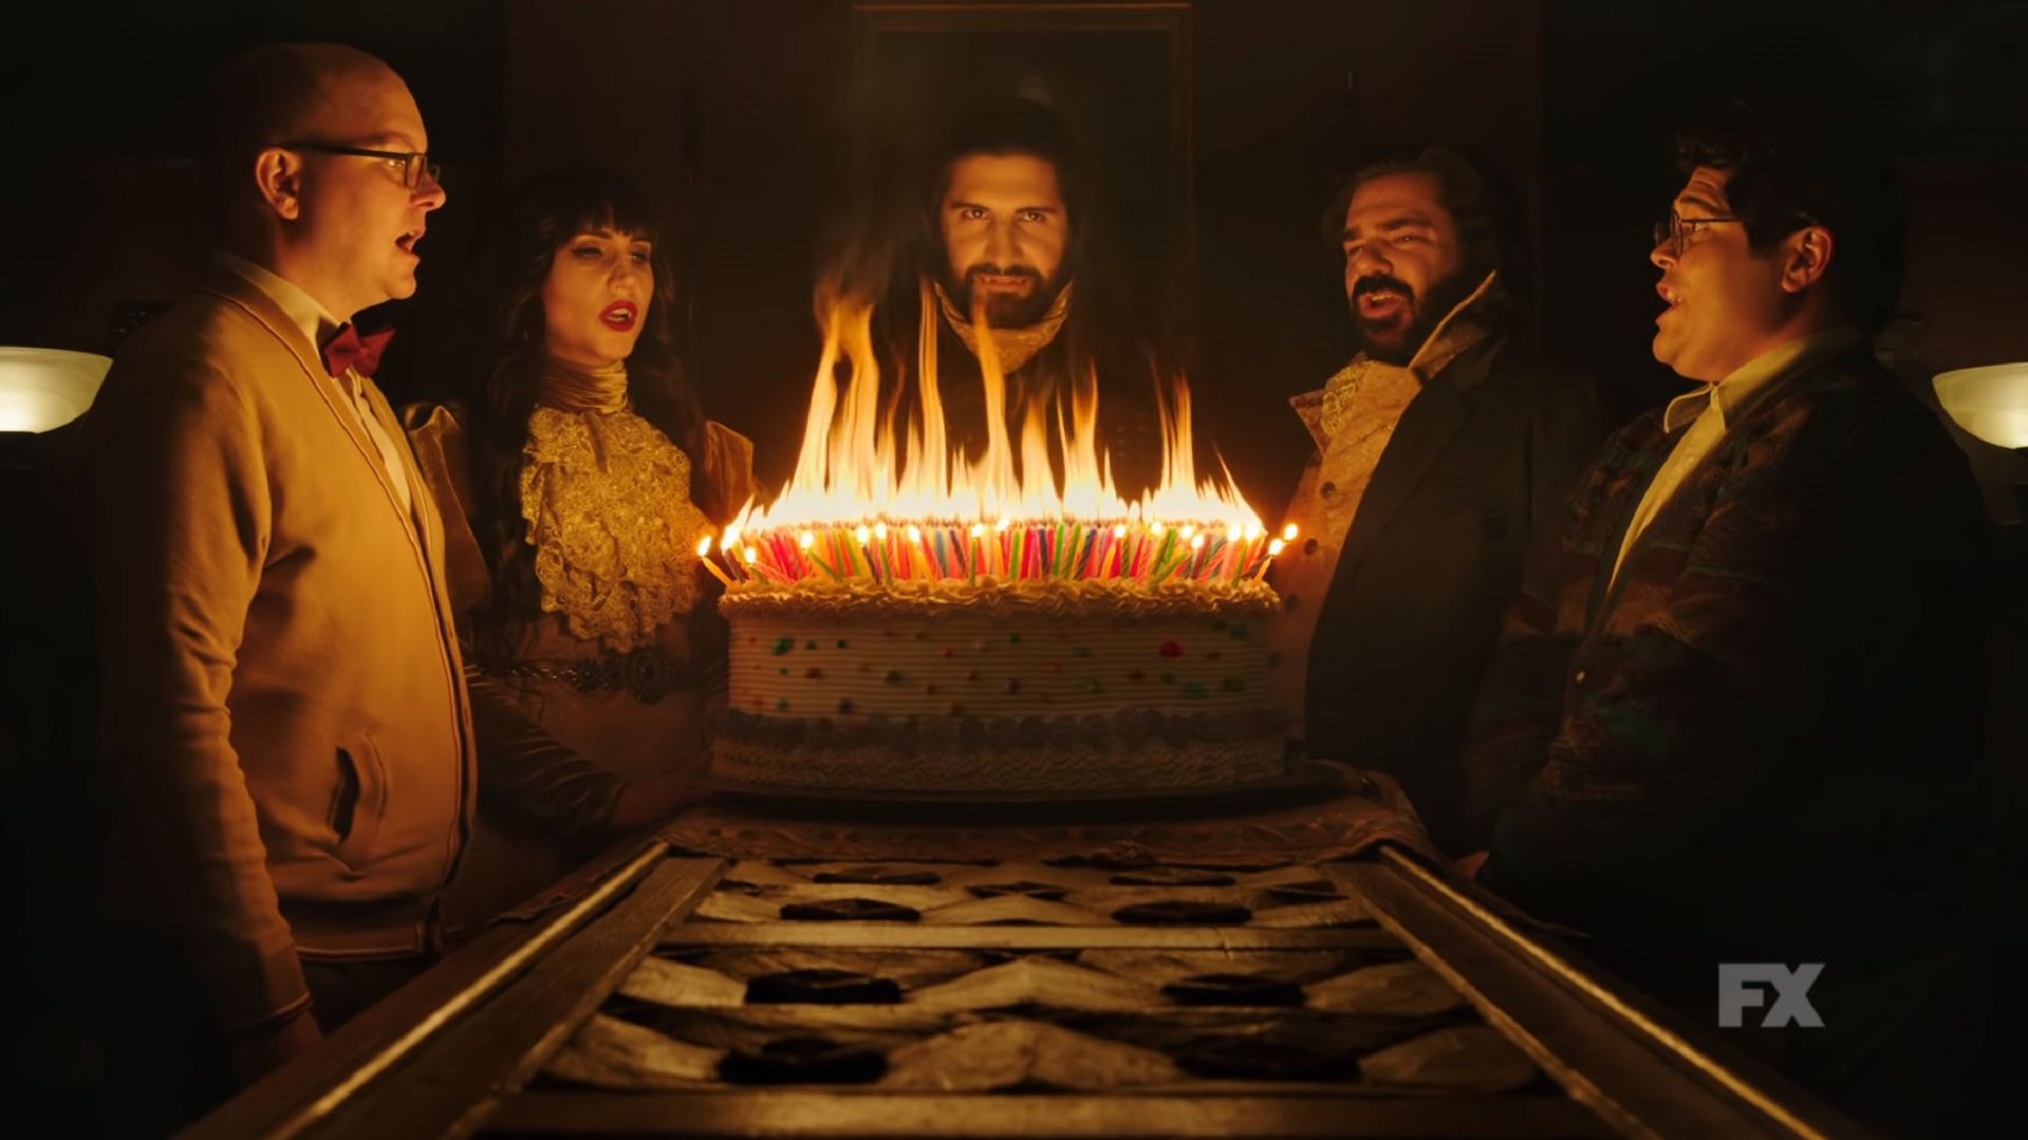 The main cast of FX's What We Do In The Shadows gathered around a birthday cake crammed full with hundreds of candles.